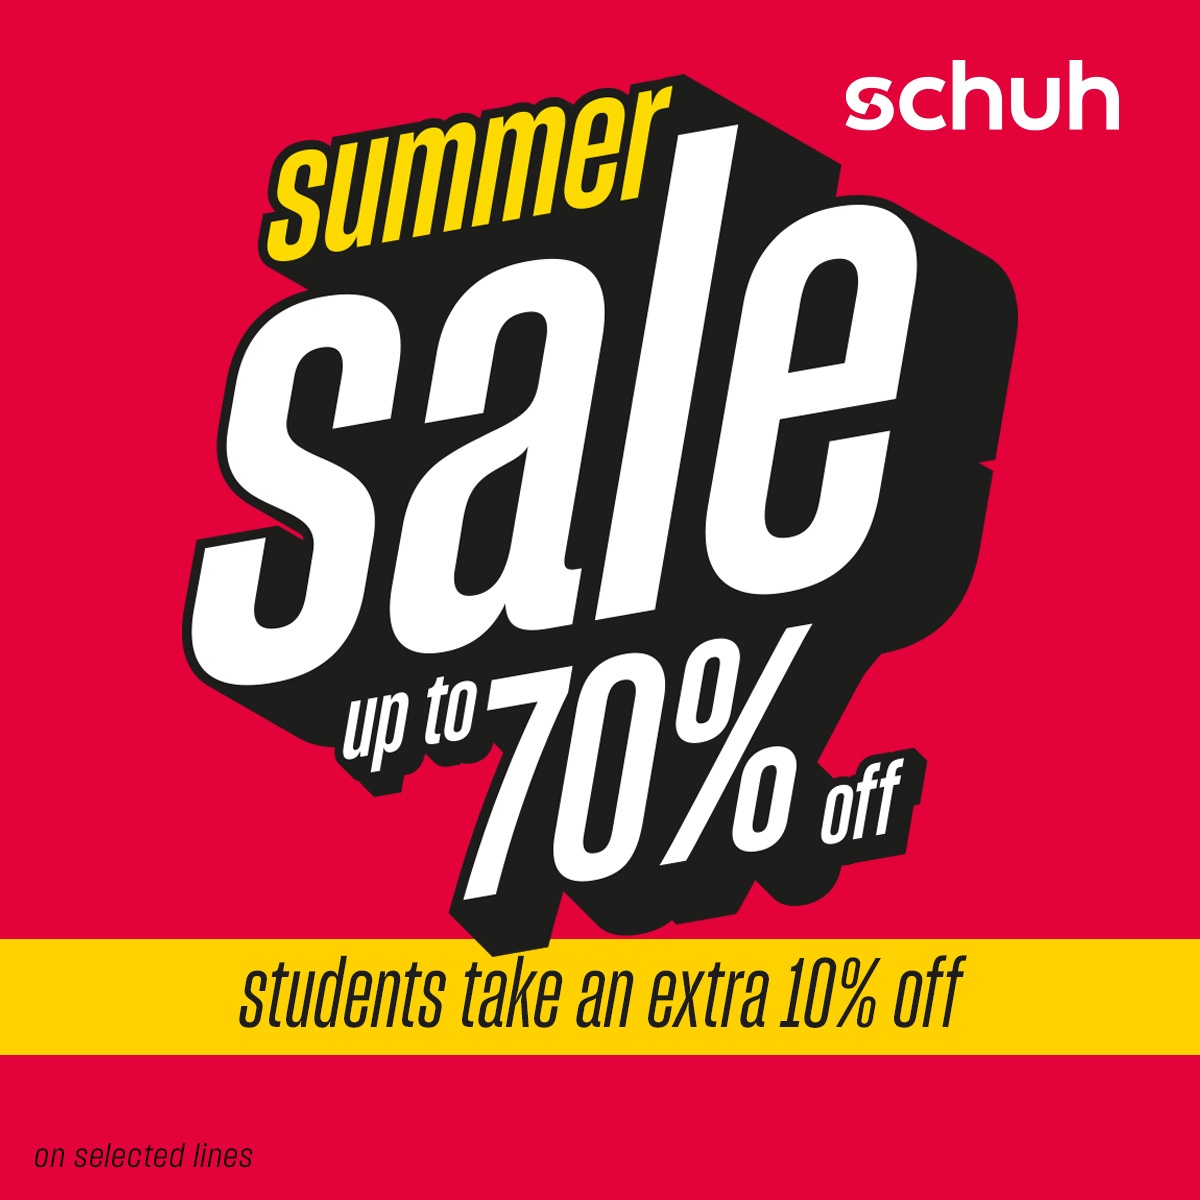 Summer Sale at @schuh : Treat yourself to some new shoes! Find them on Jervis Shopping Centre & O'Connell Street Upper #DublinTown #SummerSale